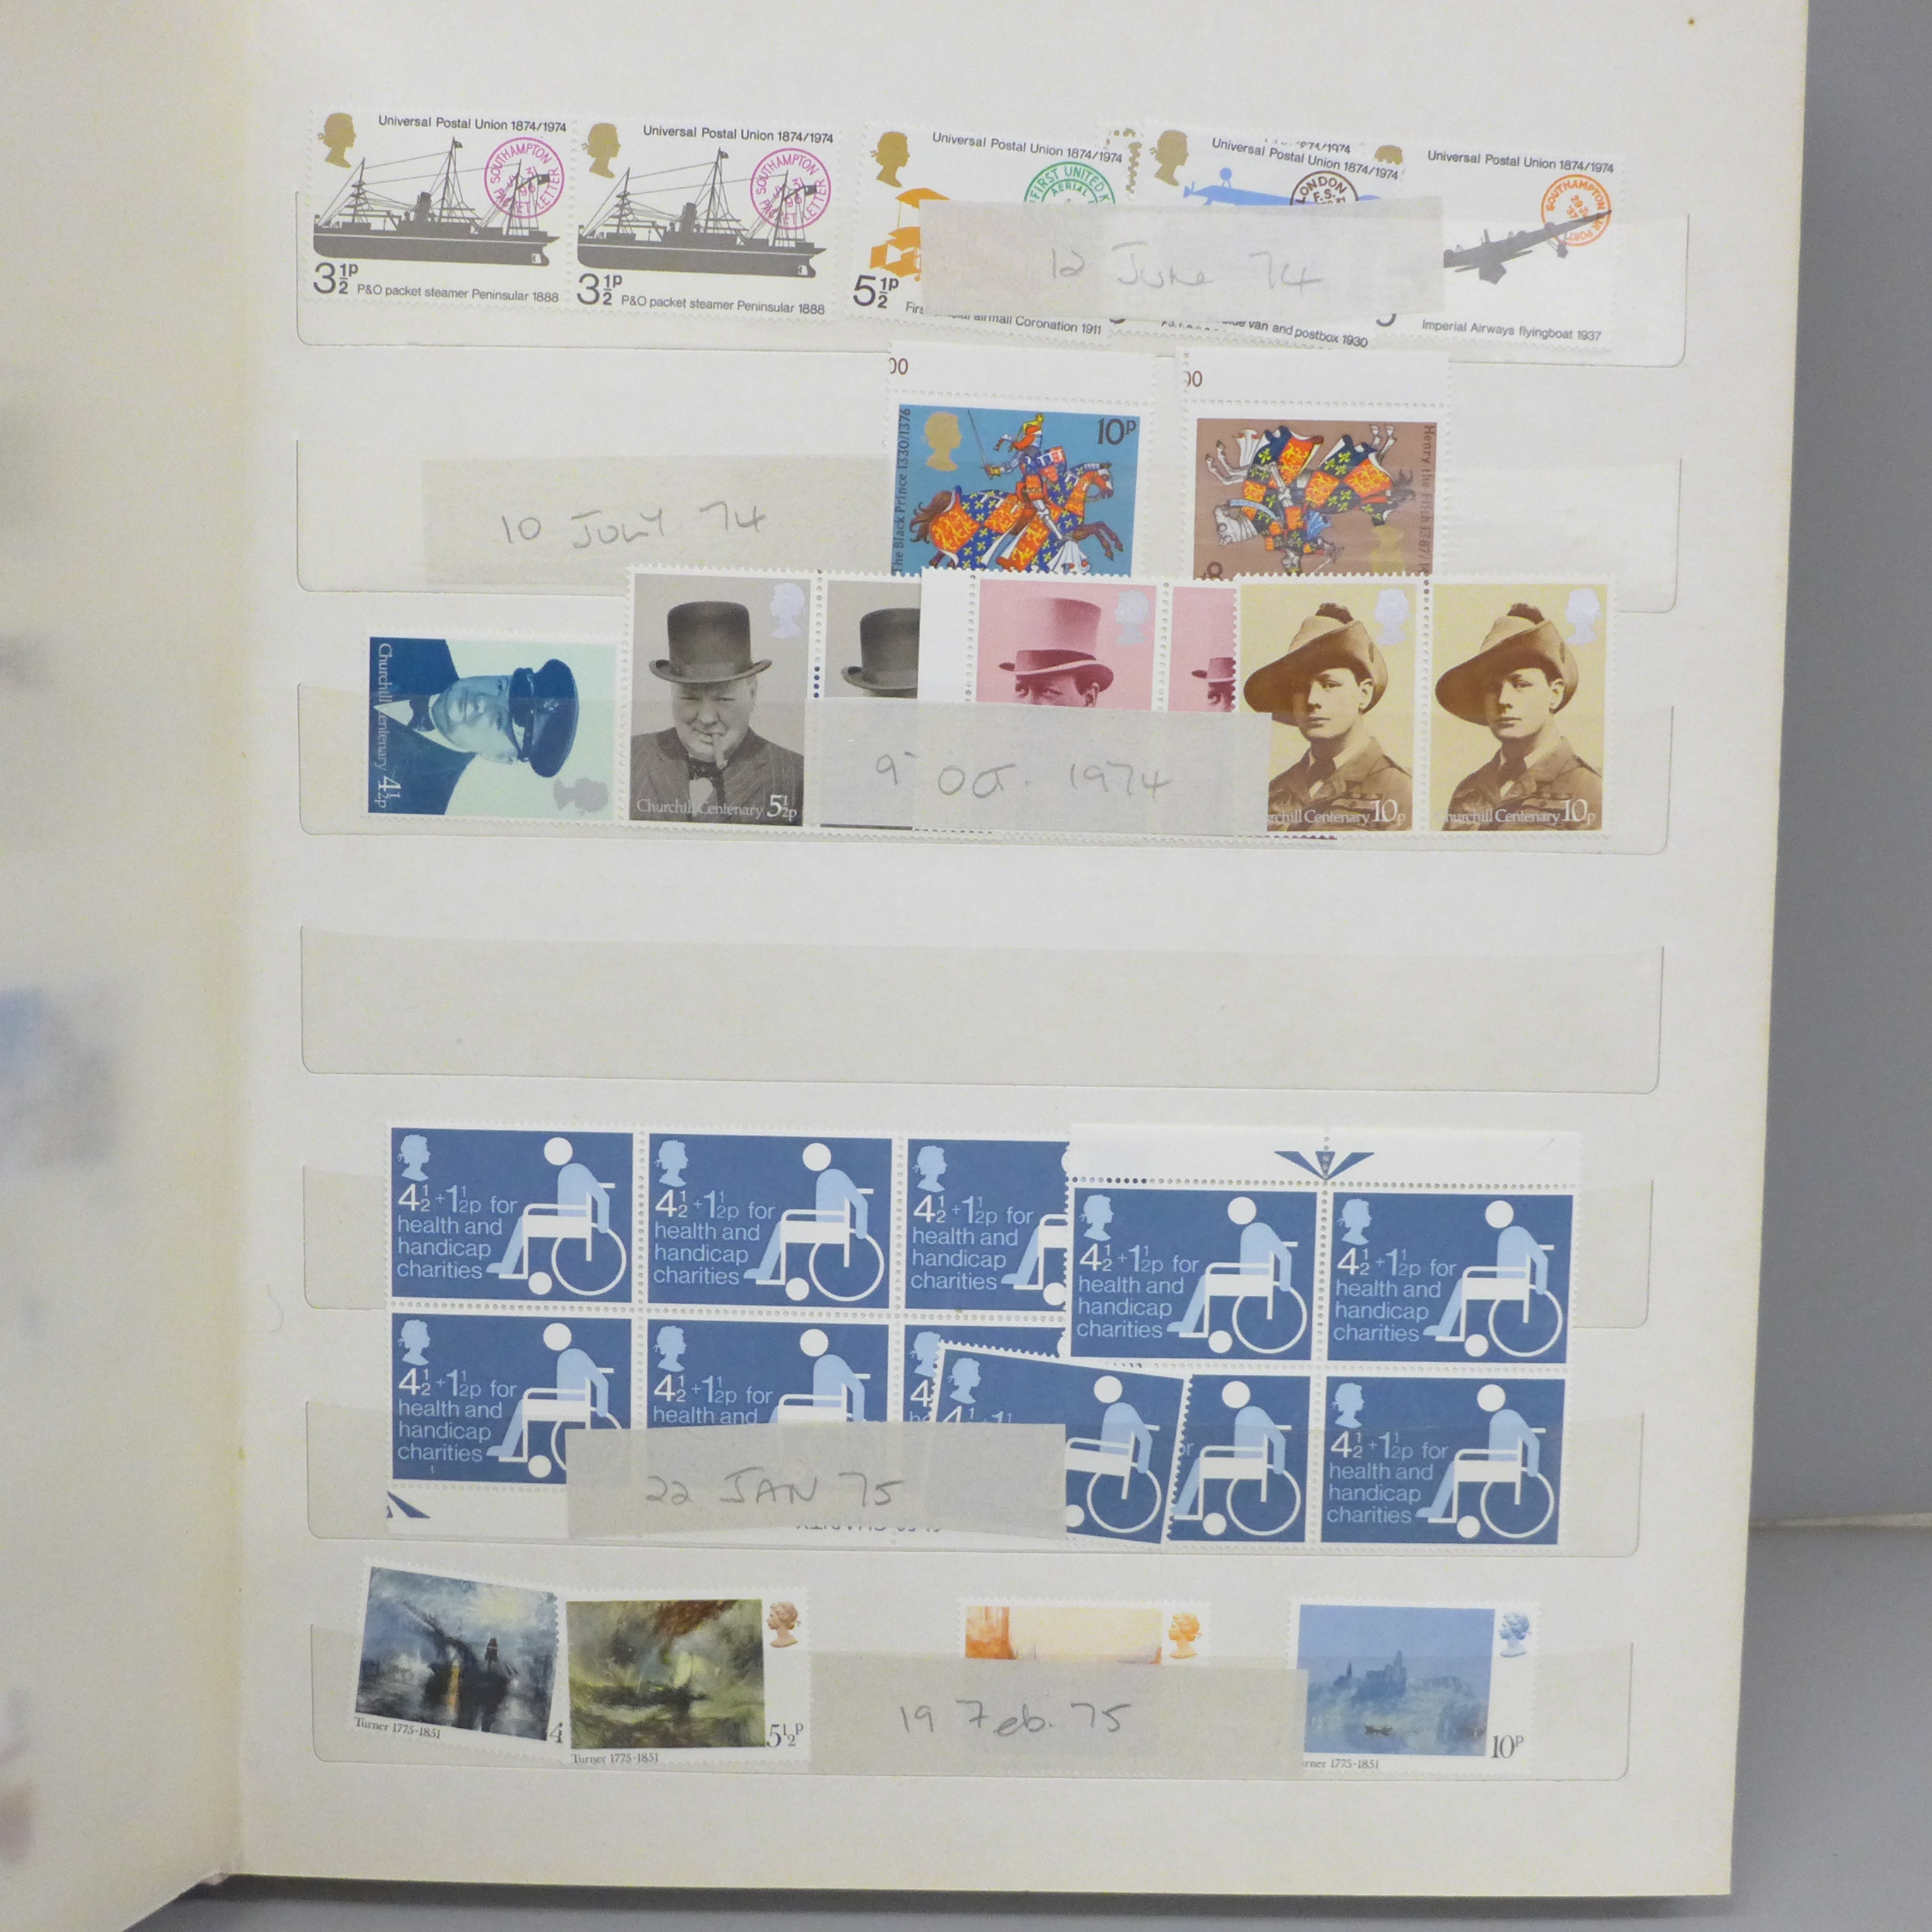 A stockbook containing complete Great Britain Queen Elizabeth II commemorative issues, 1971-1981 - Image 4 of 7